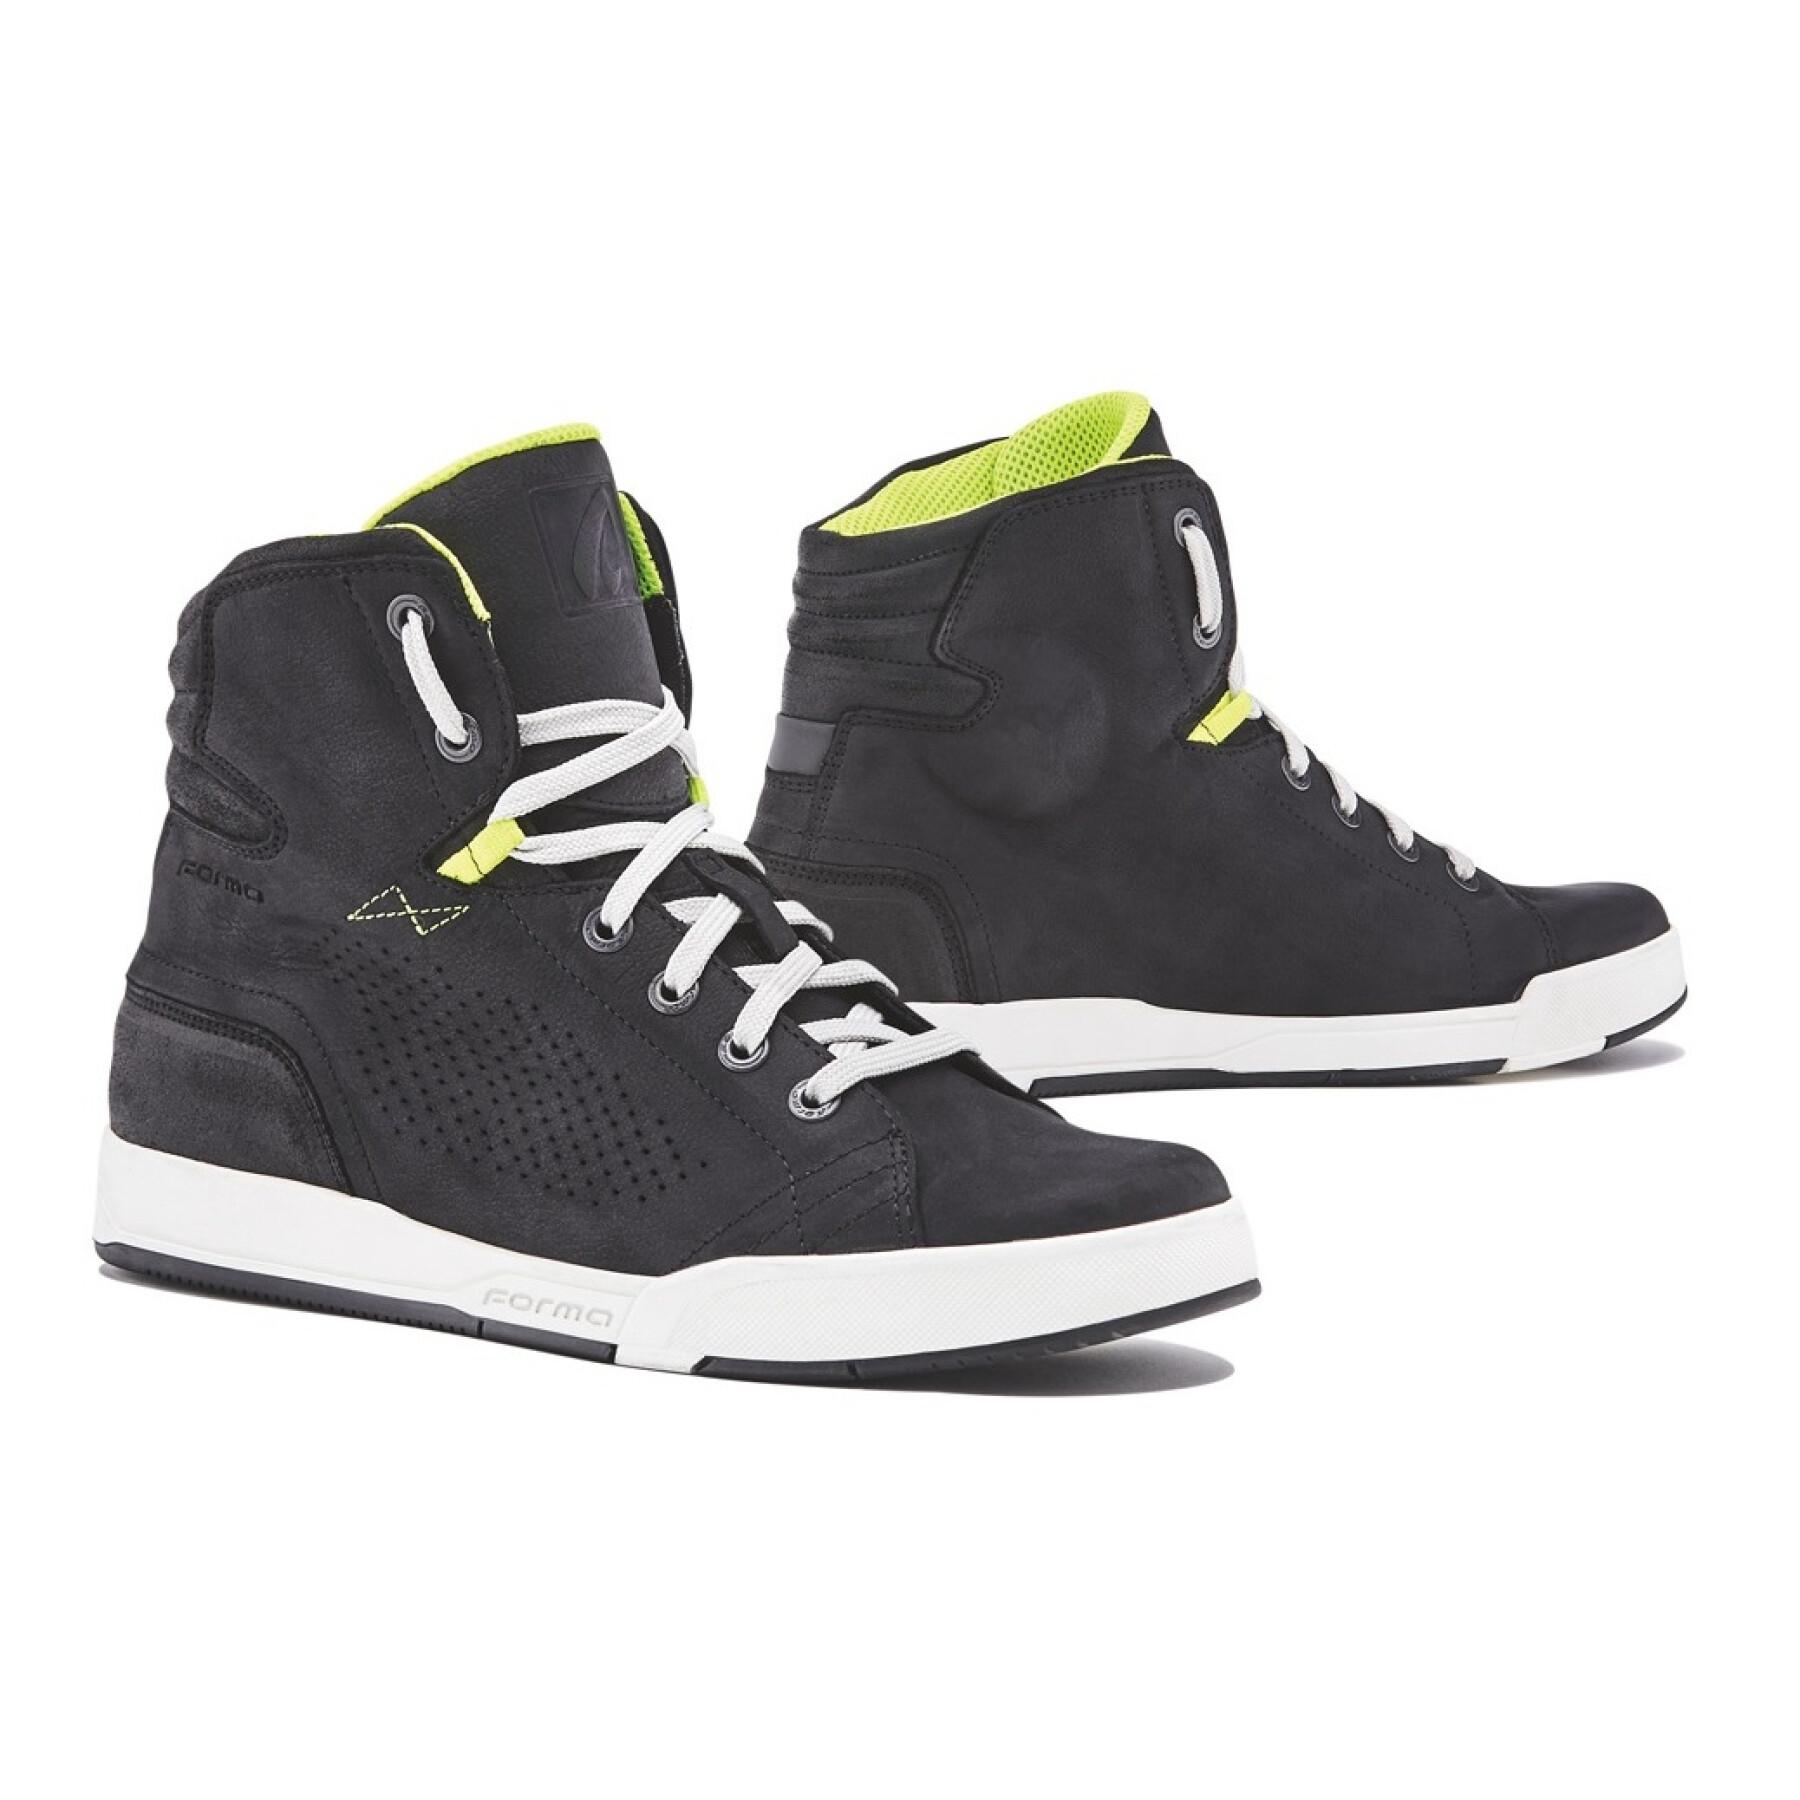 Motorcycle shoes Forma Swift Flow